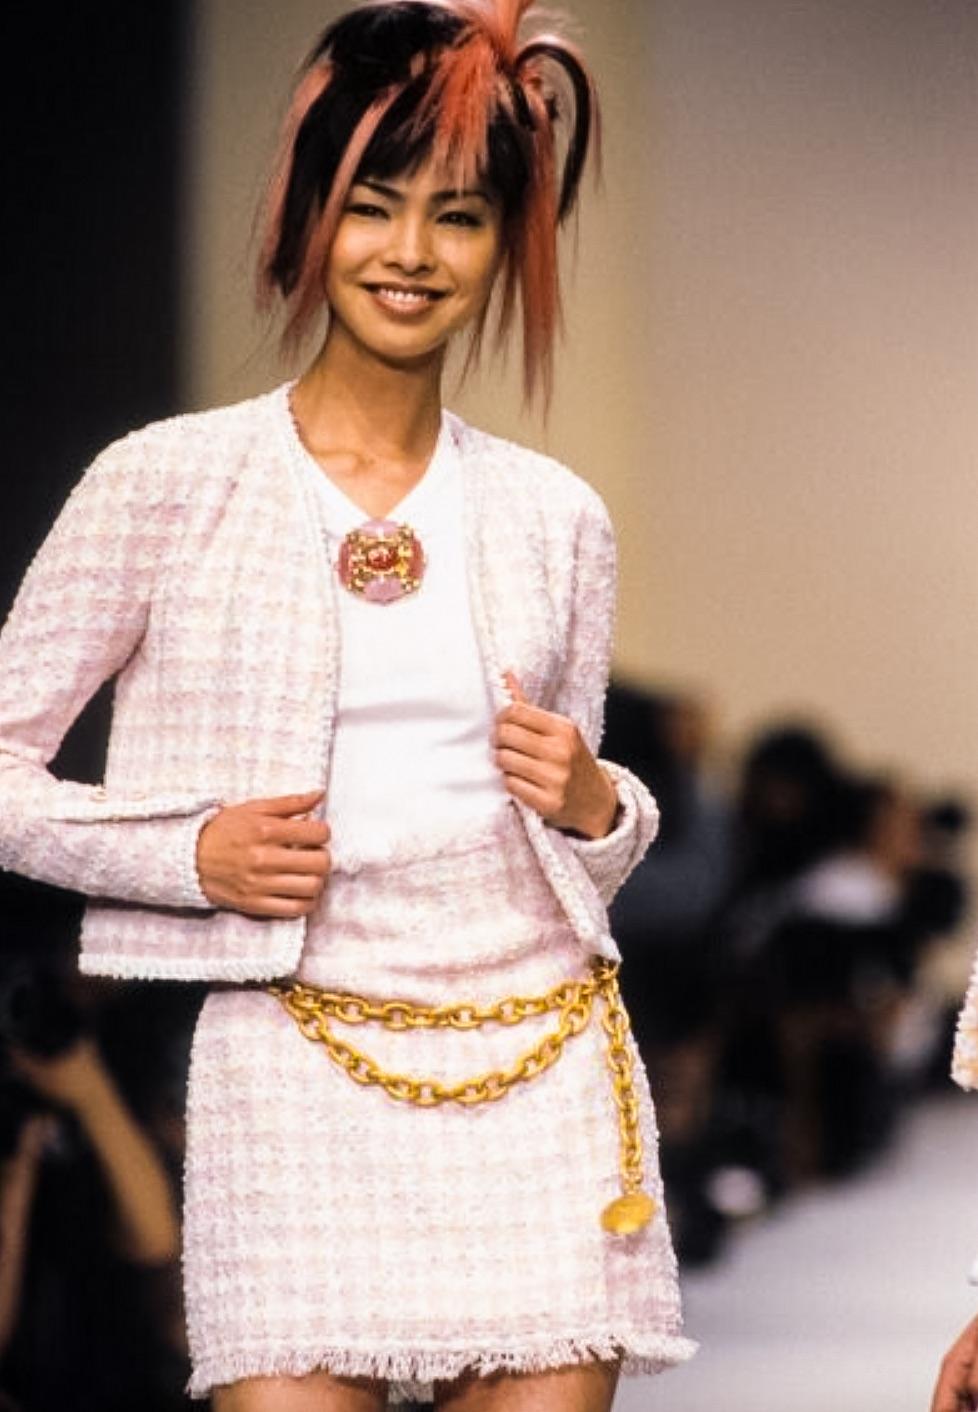 The iconic Chanel suit has become synonymous with timeless elegance and sophistication. This particular collectible suit from the Spring/Summer 1994 collection is a stunning example of the brand's exquisite attention to detail. Crafted from a pastel